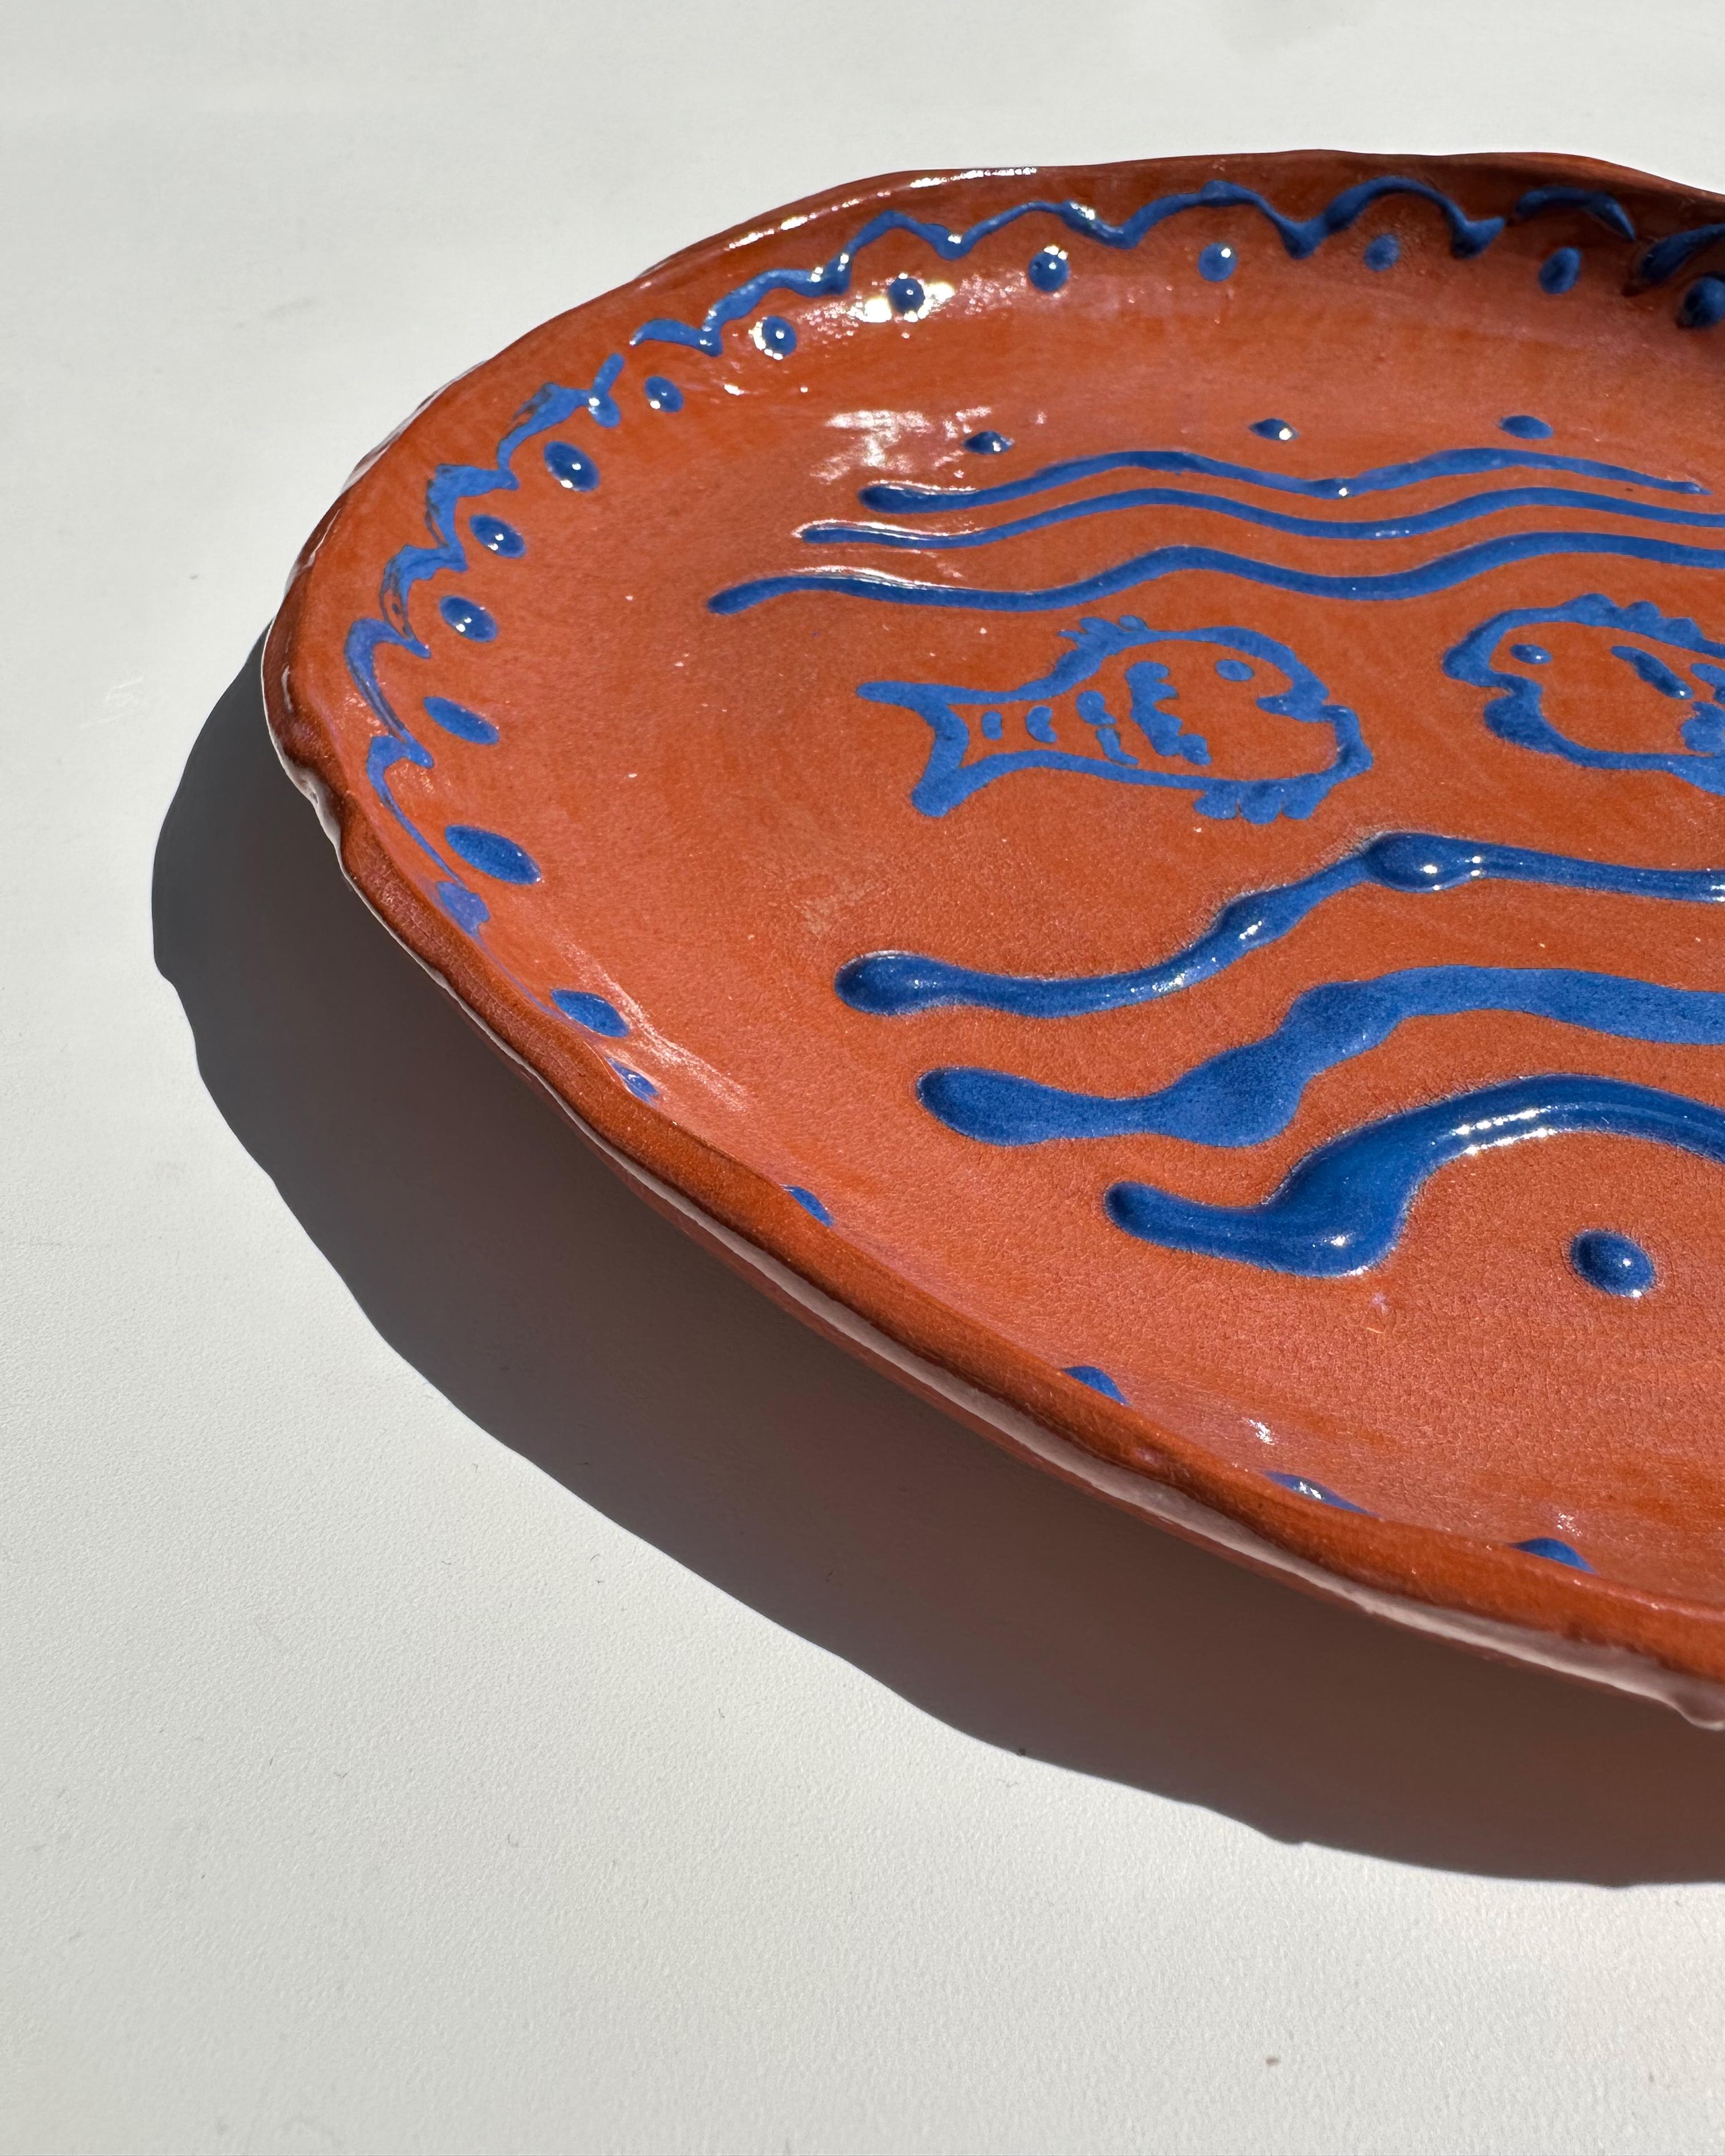 Folk Art Hand-Painted Ceramic Serving Plate with Blue Aquatic Scalloped Details